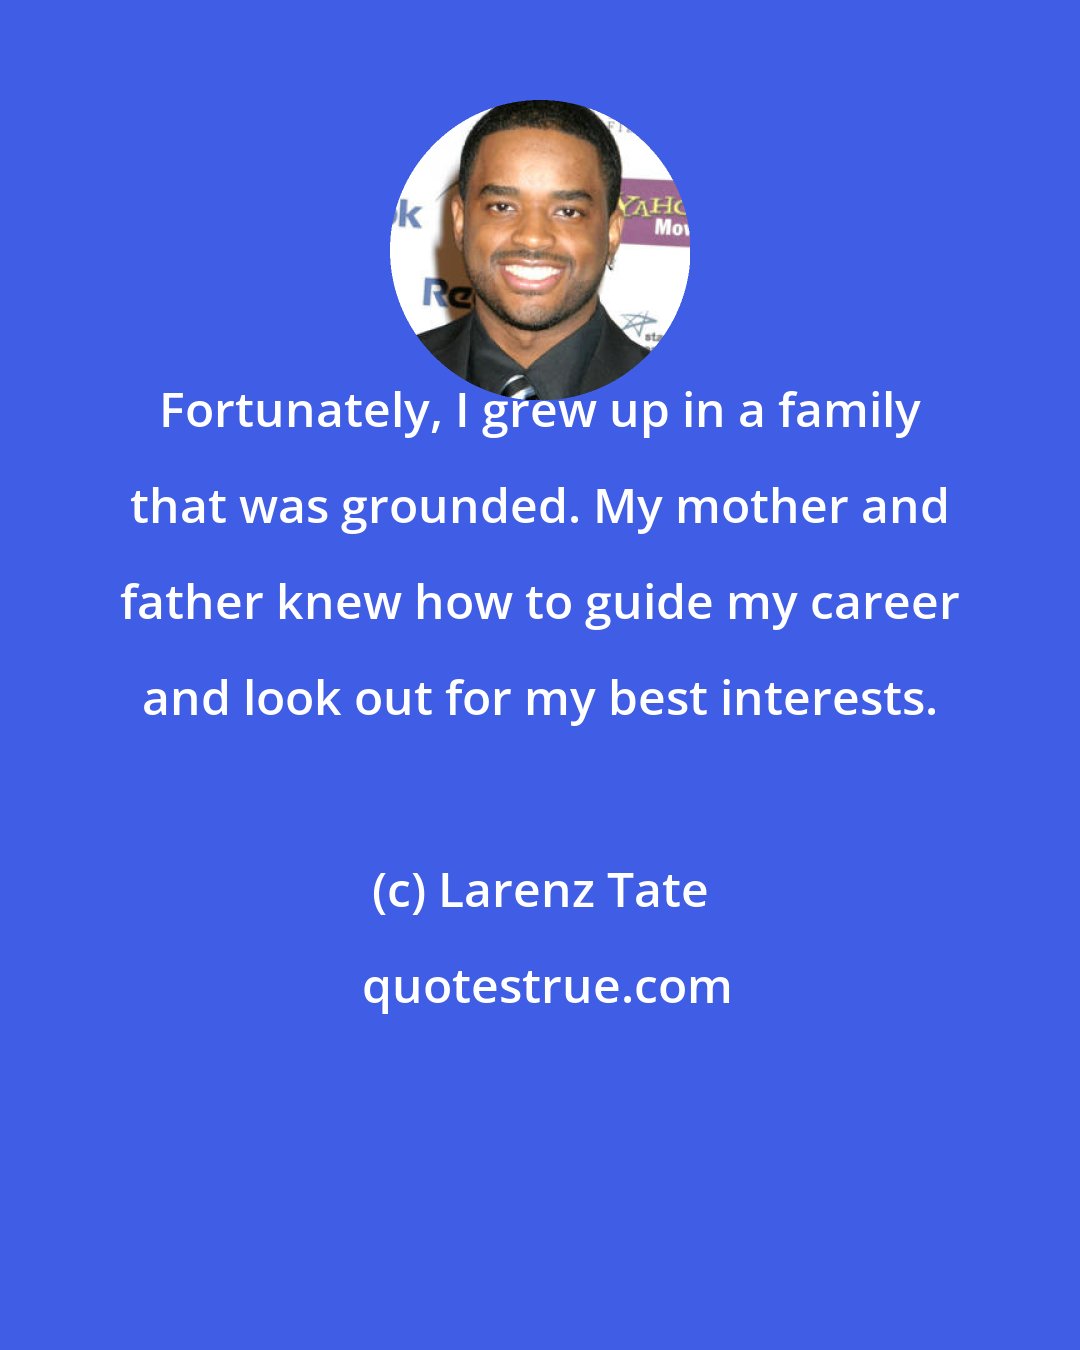 Larenz Tate: Fortunately, I grew up in a family that was grounded. My mother and father knew how to guide my career and look out for my best interests.